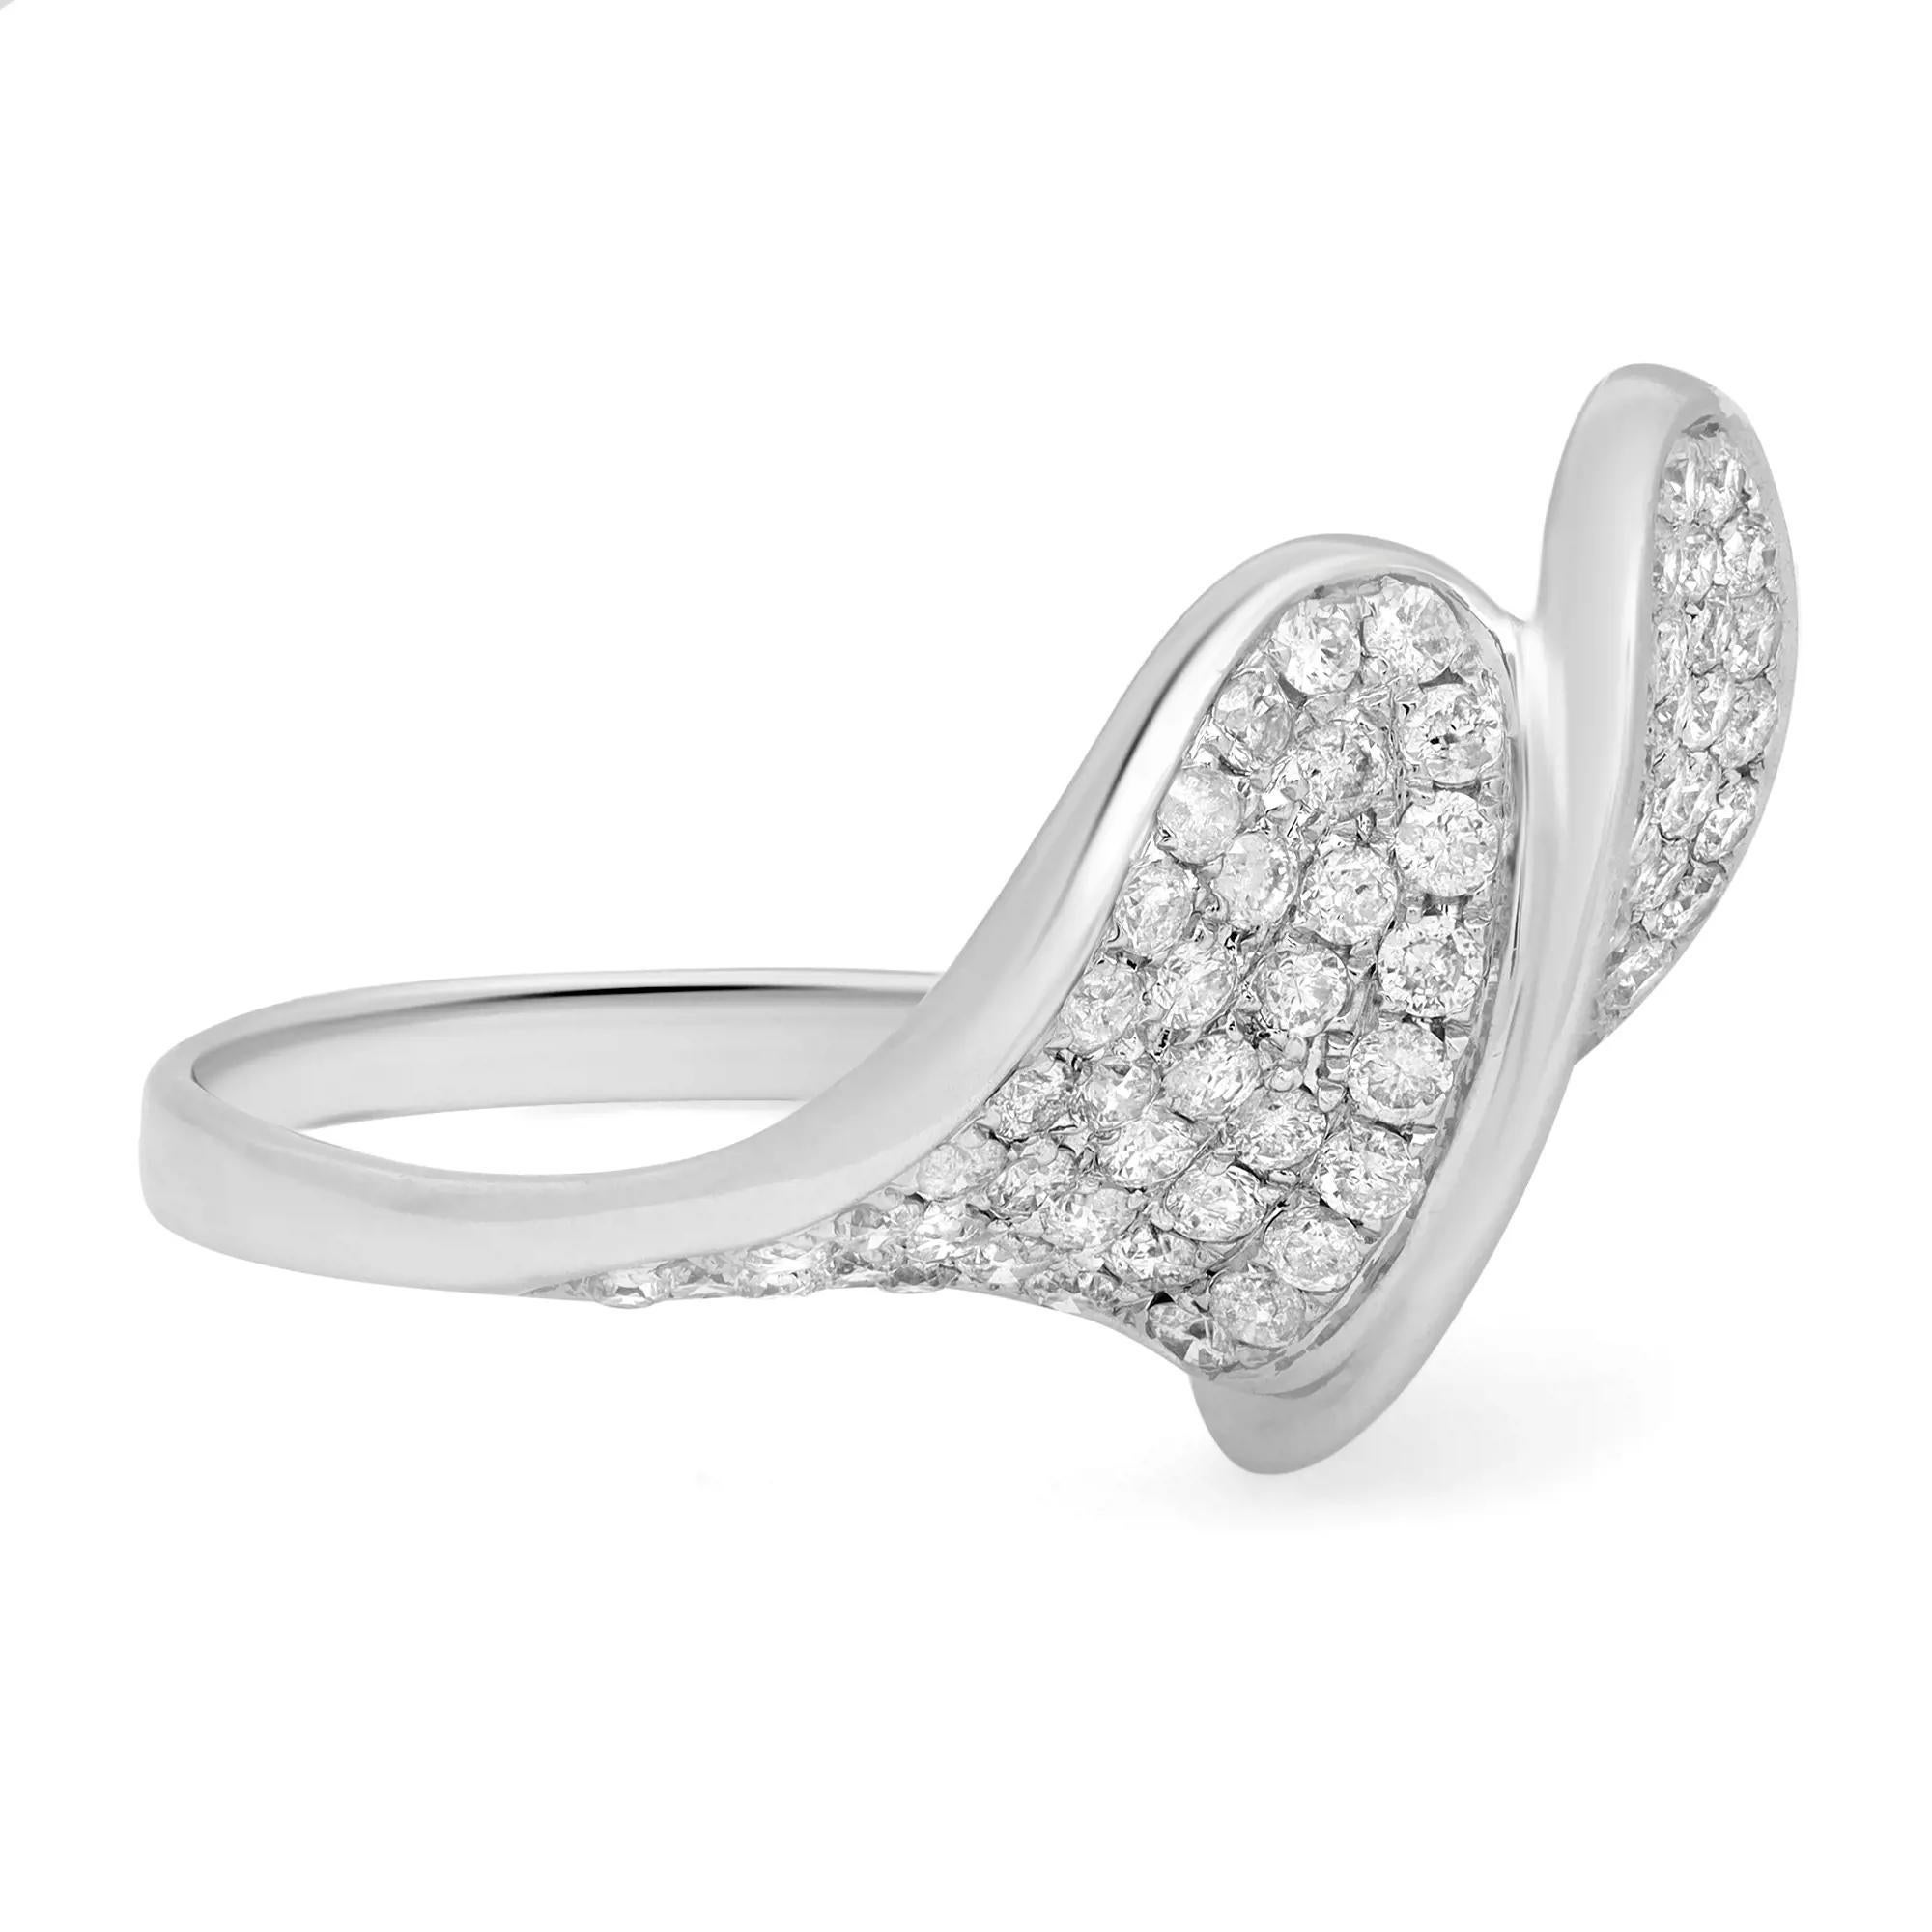 1.58cttw Pave Set Round Cut Diamond Ladies Cocktail Ring 14k White Gold In New Condition For Sale In New York, NY